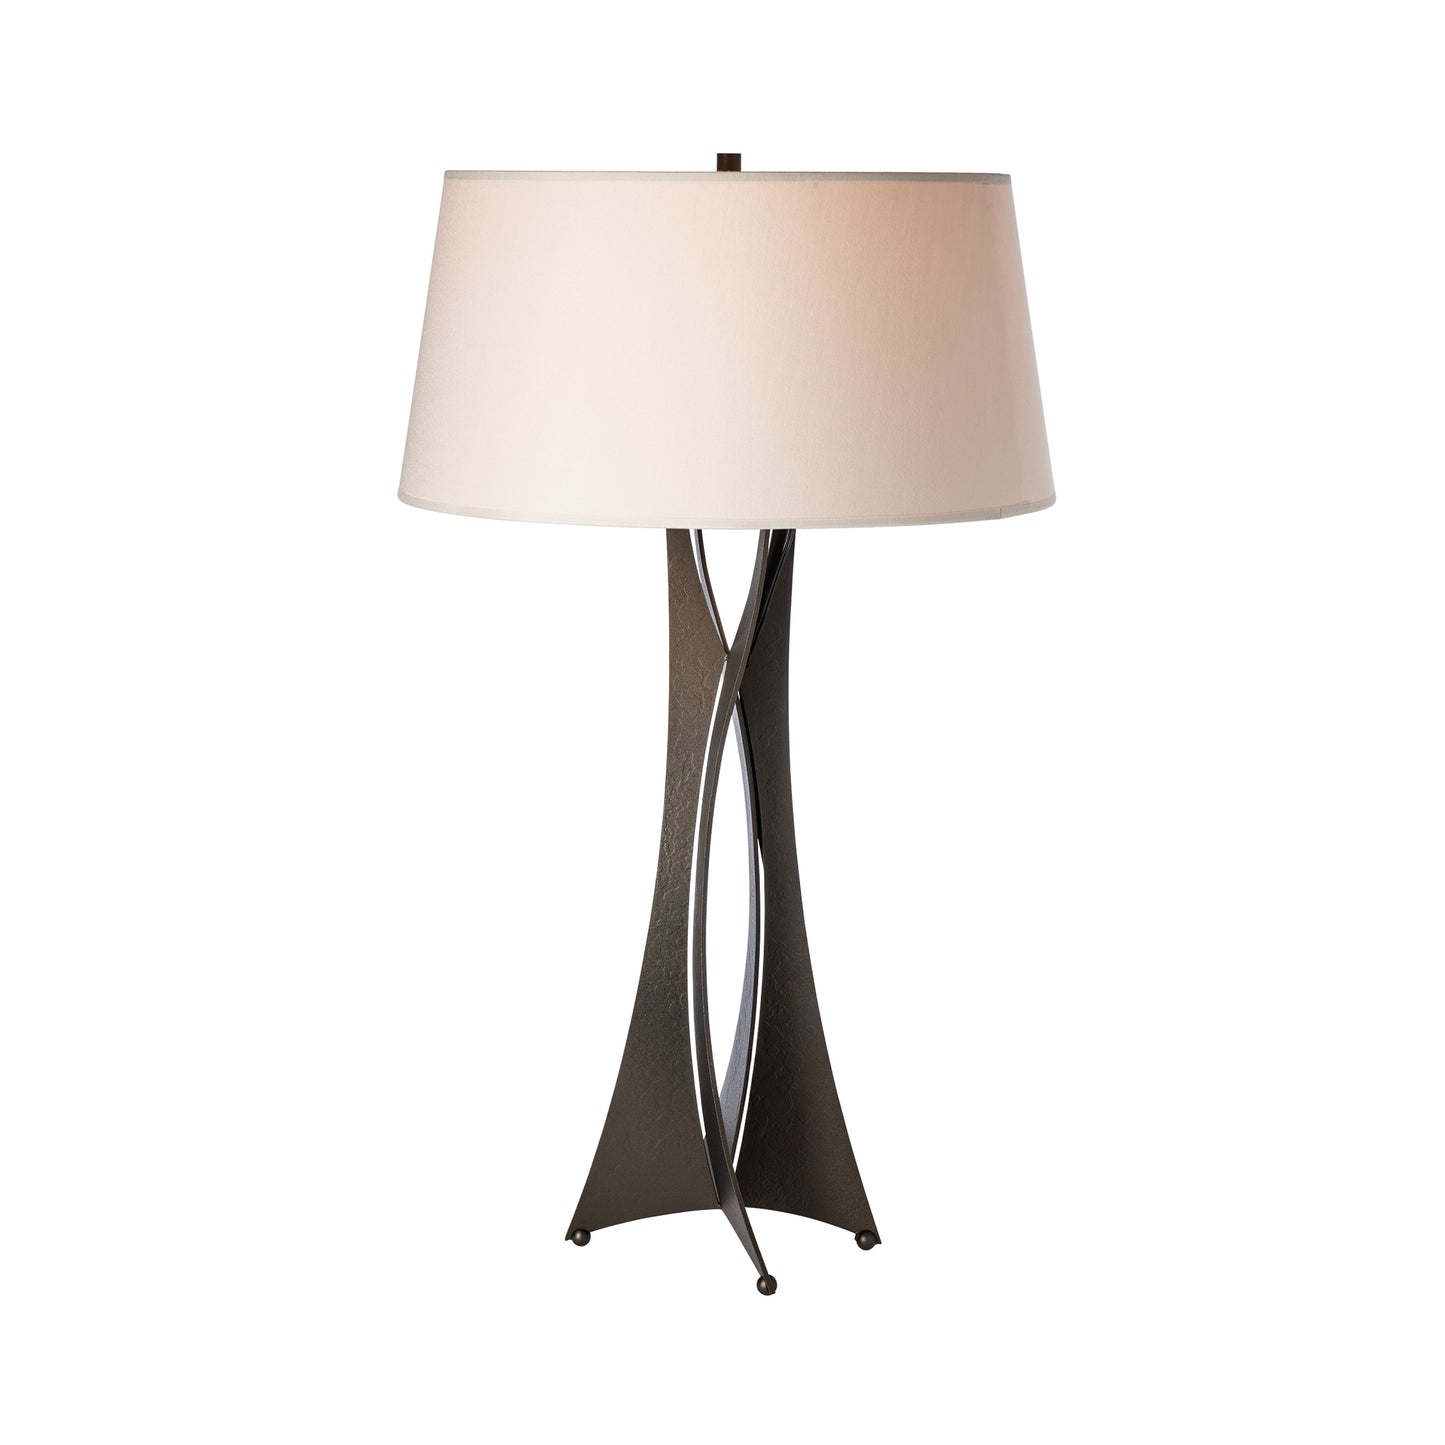 A Moreau Table Lamp by Hubbardton Forge with a beige lampshade and a dark brown, hand-crafted wrought iron base with three legs, isolated on a white background.